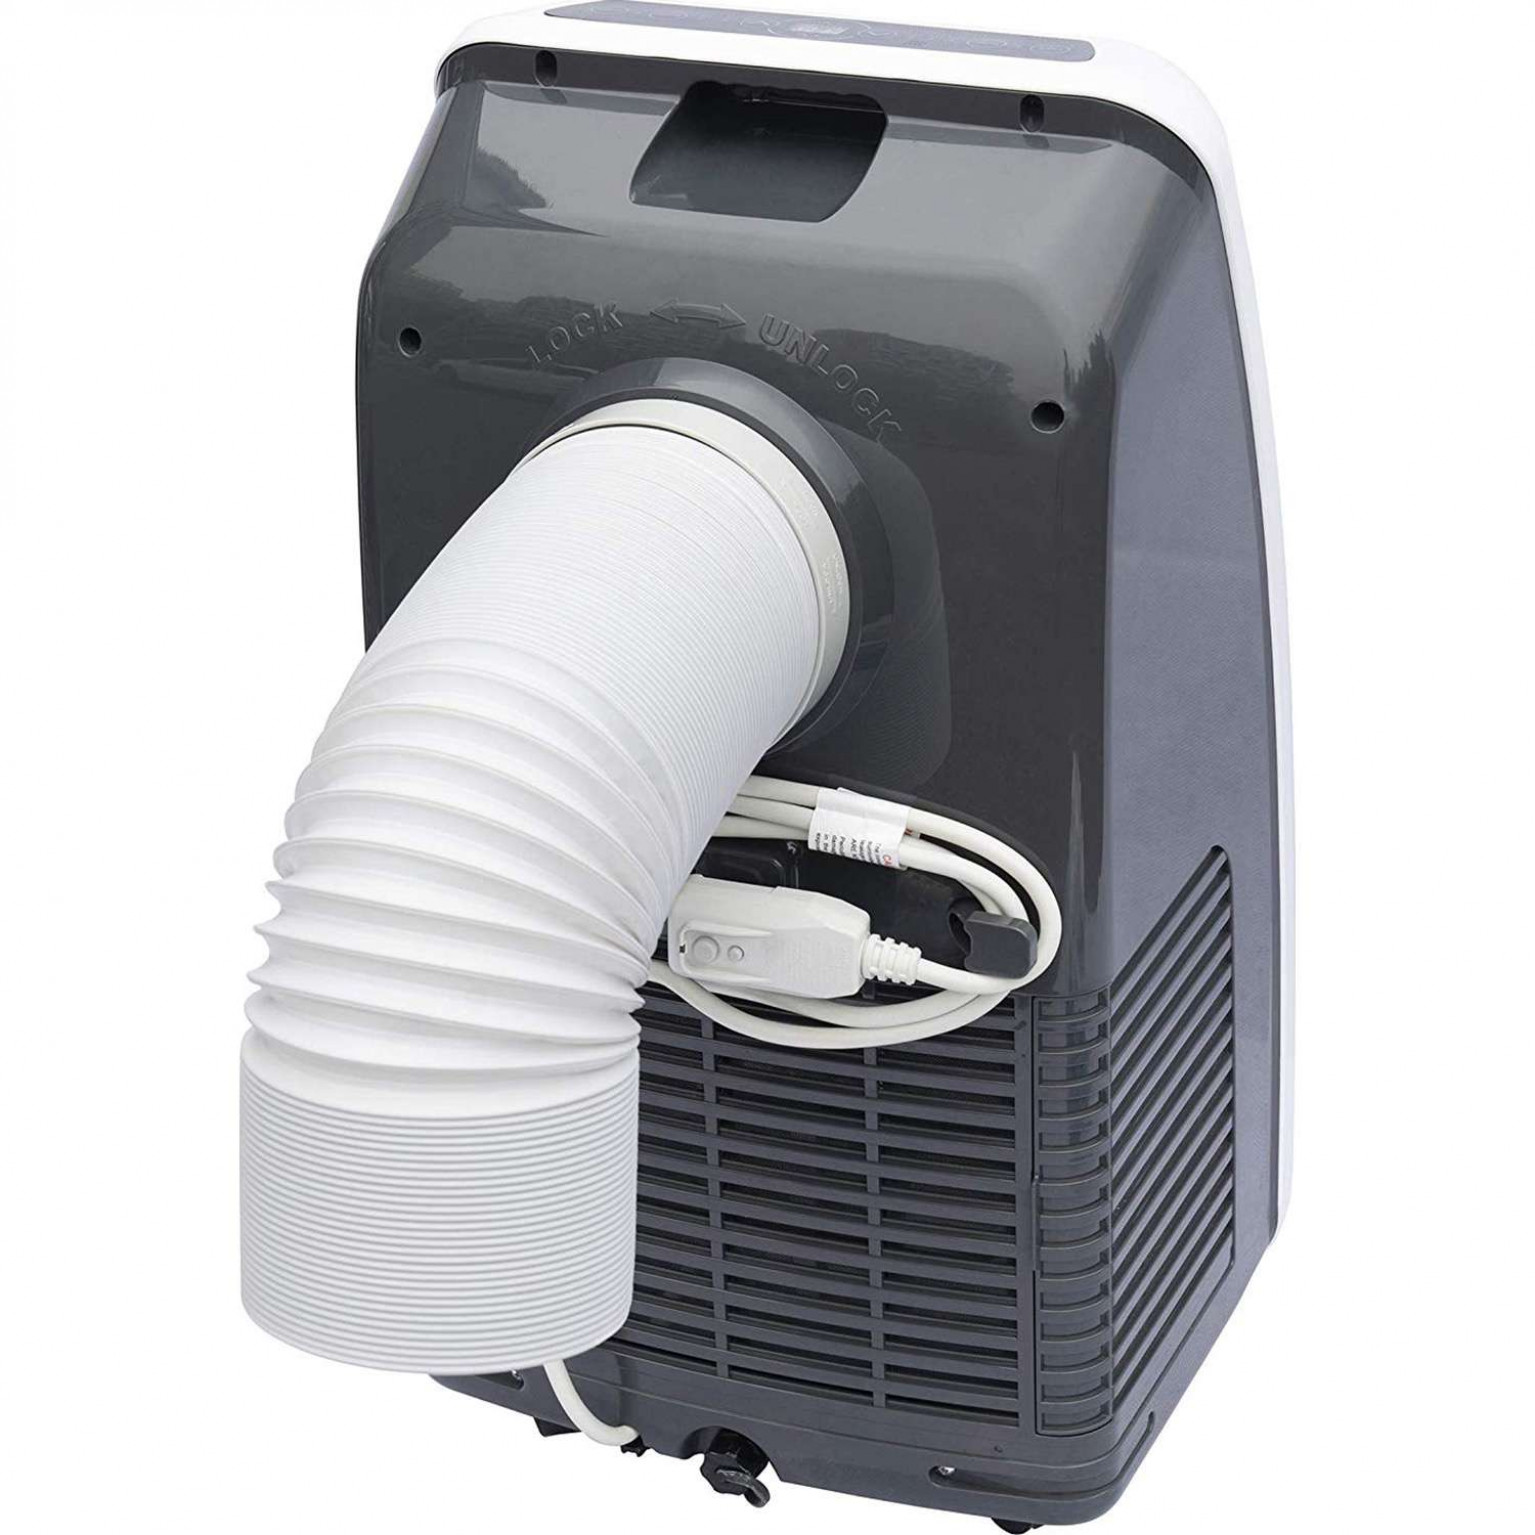 Is There A Portable Ac That Doesn't Need To Be Vented